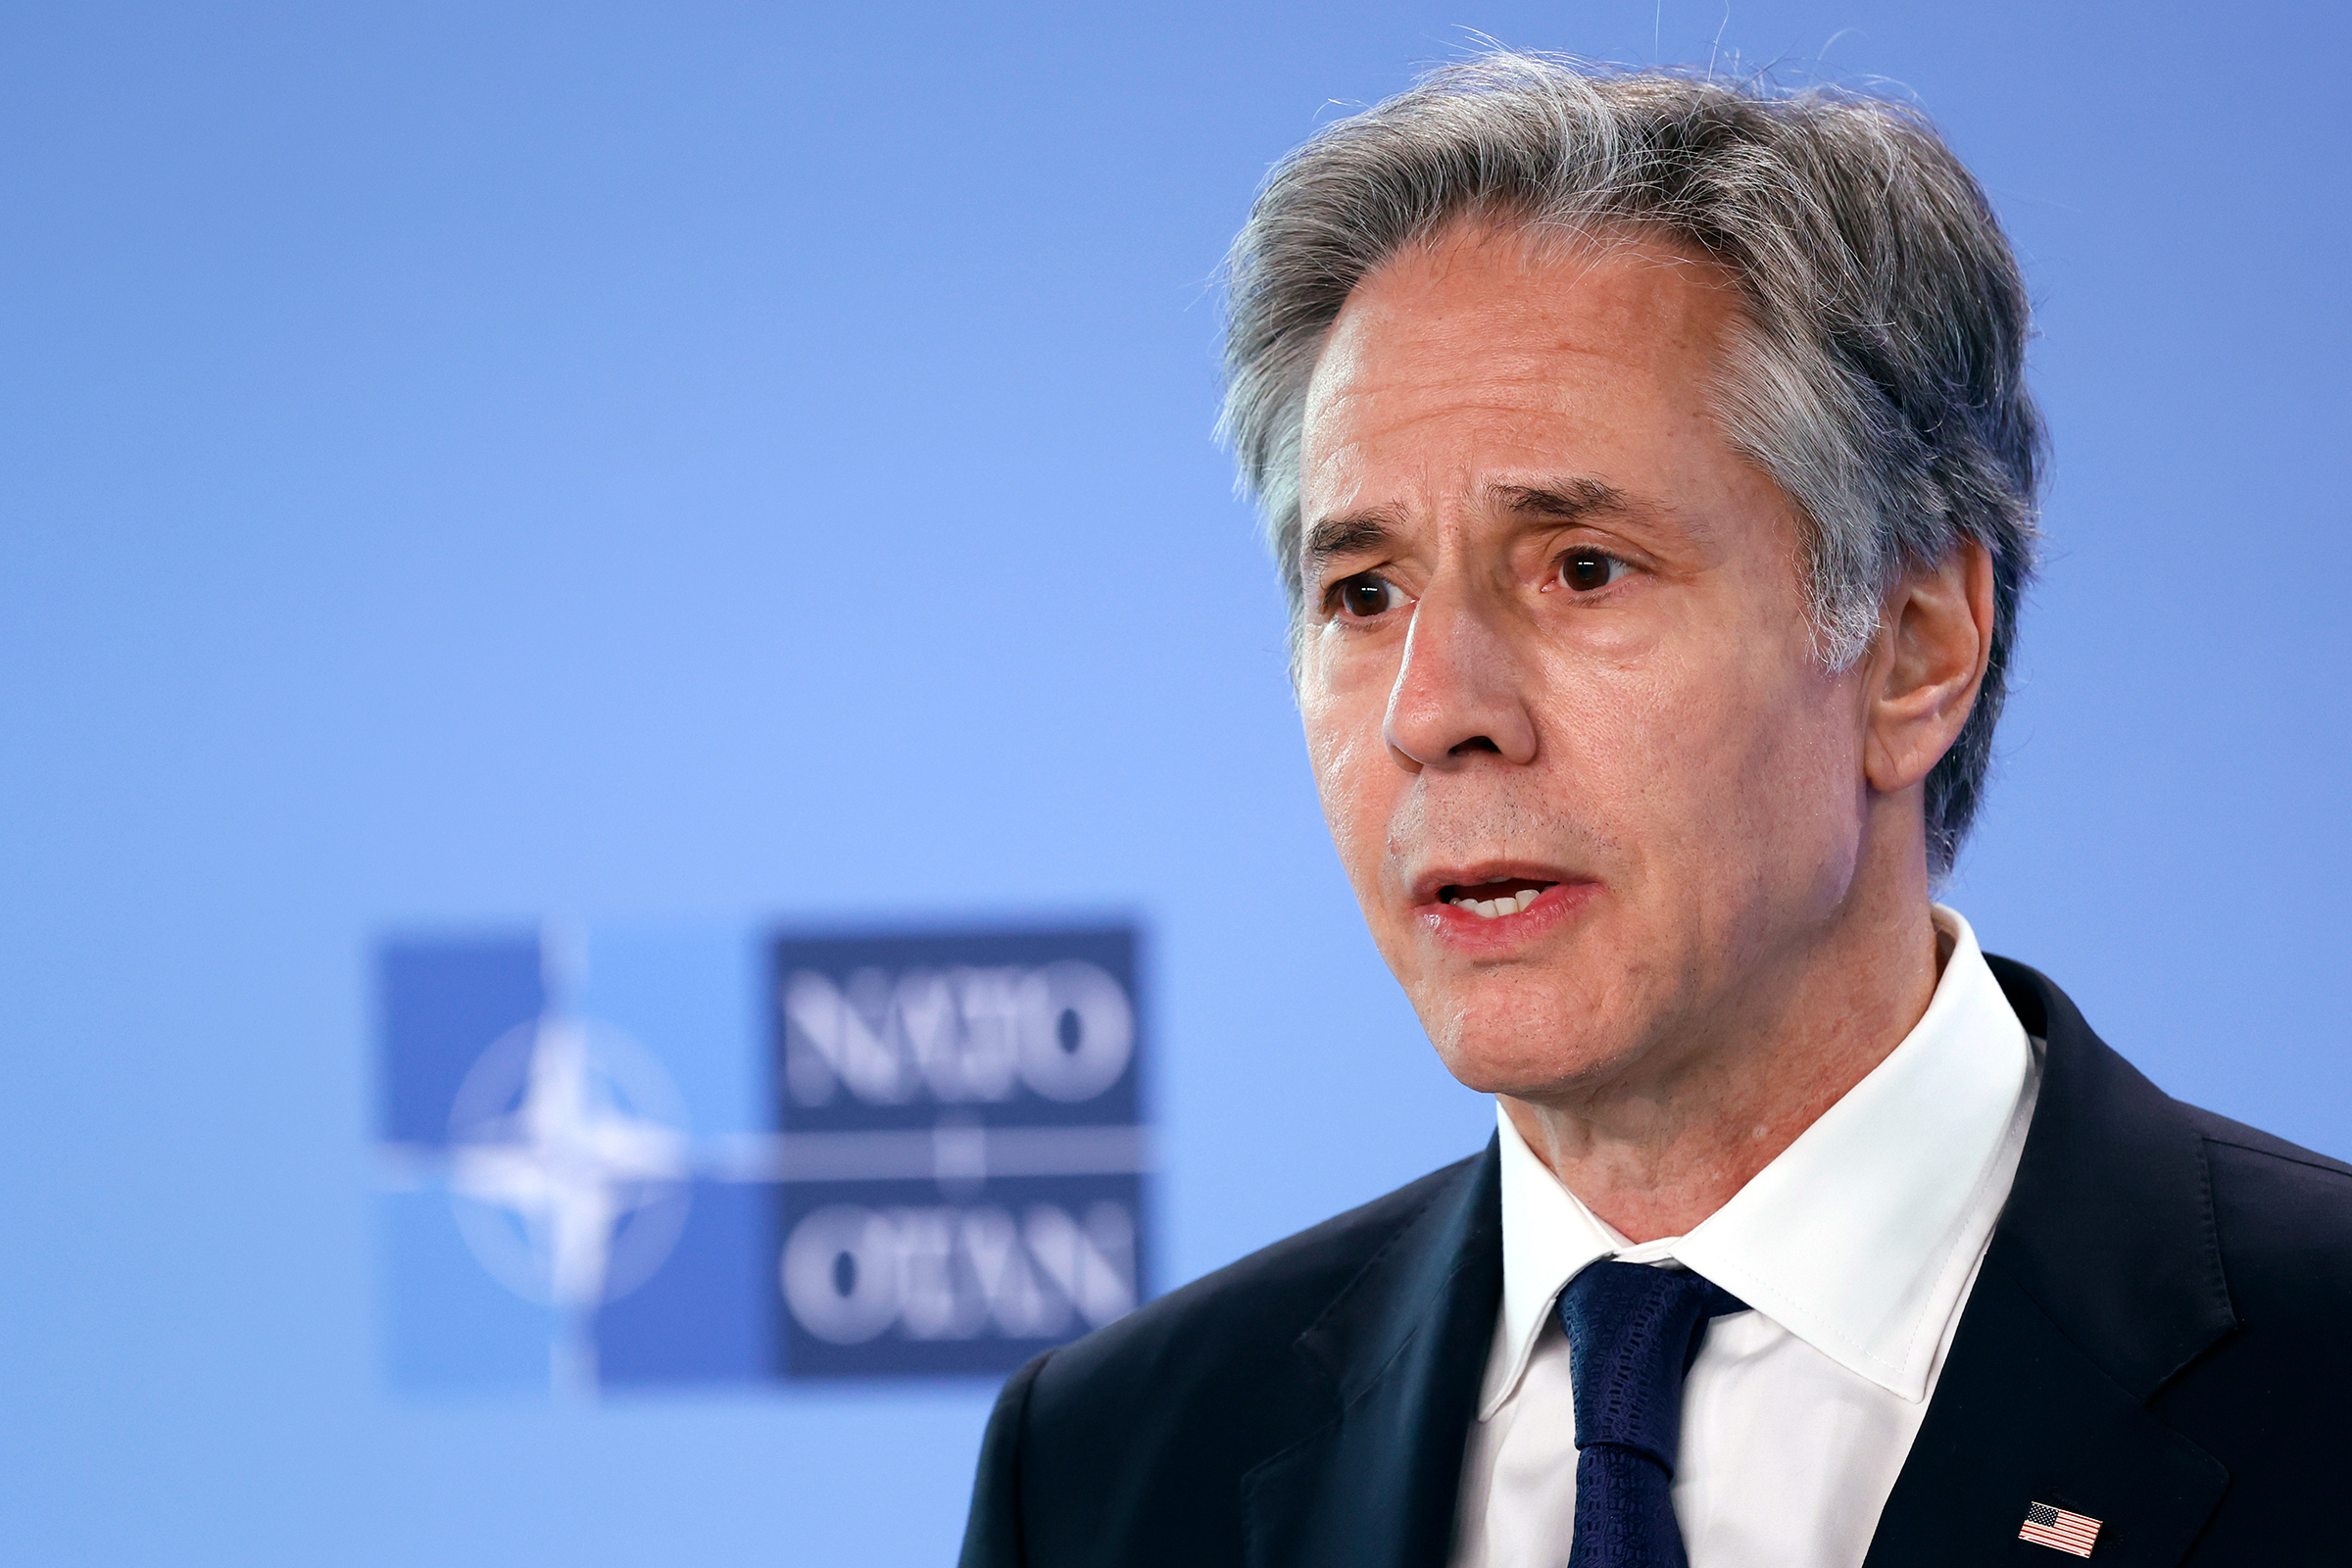 United States Secretary of State Antony Blinken addresses the media during a meeting of NATO foreign ministers at NATO headquarters in Brussels on Wednesday, April 3.